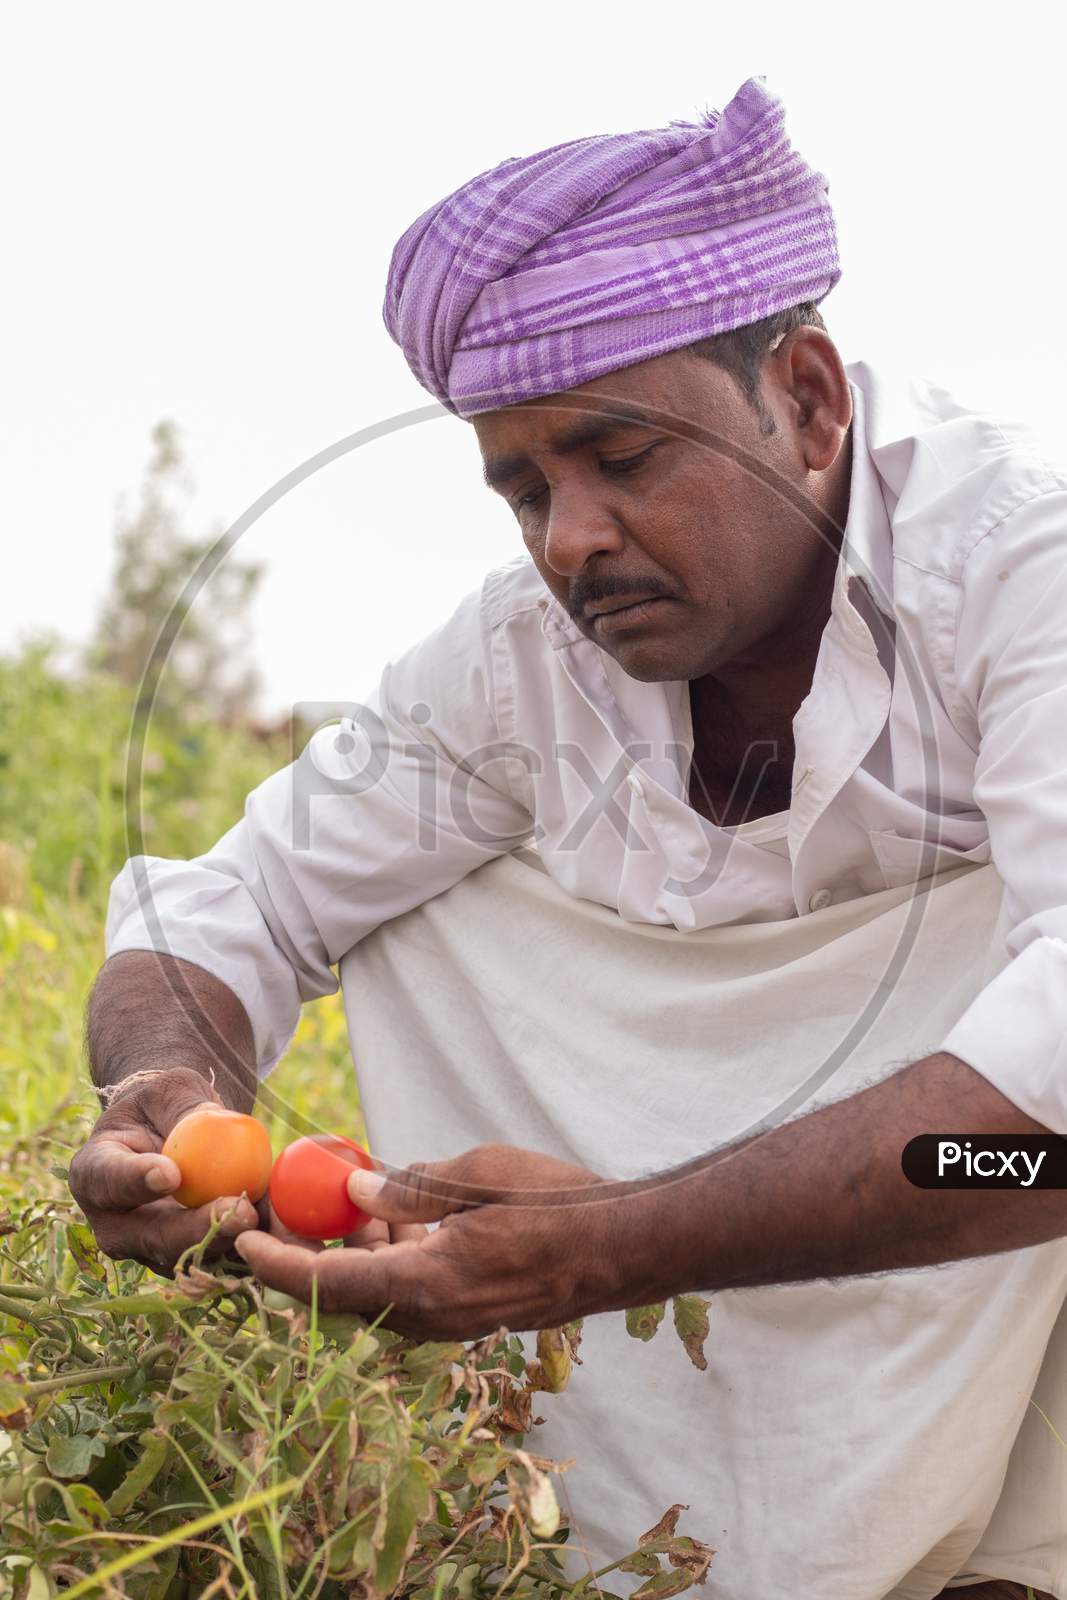 An Indian Farmer holding Tomatoes in Agriculture Field